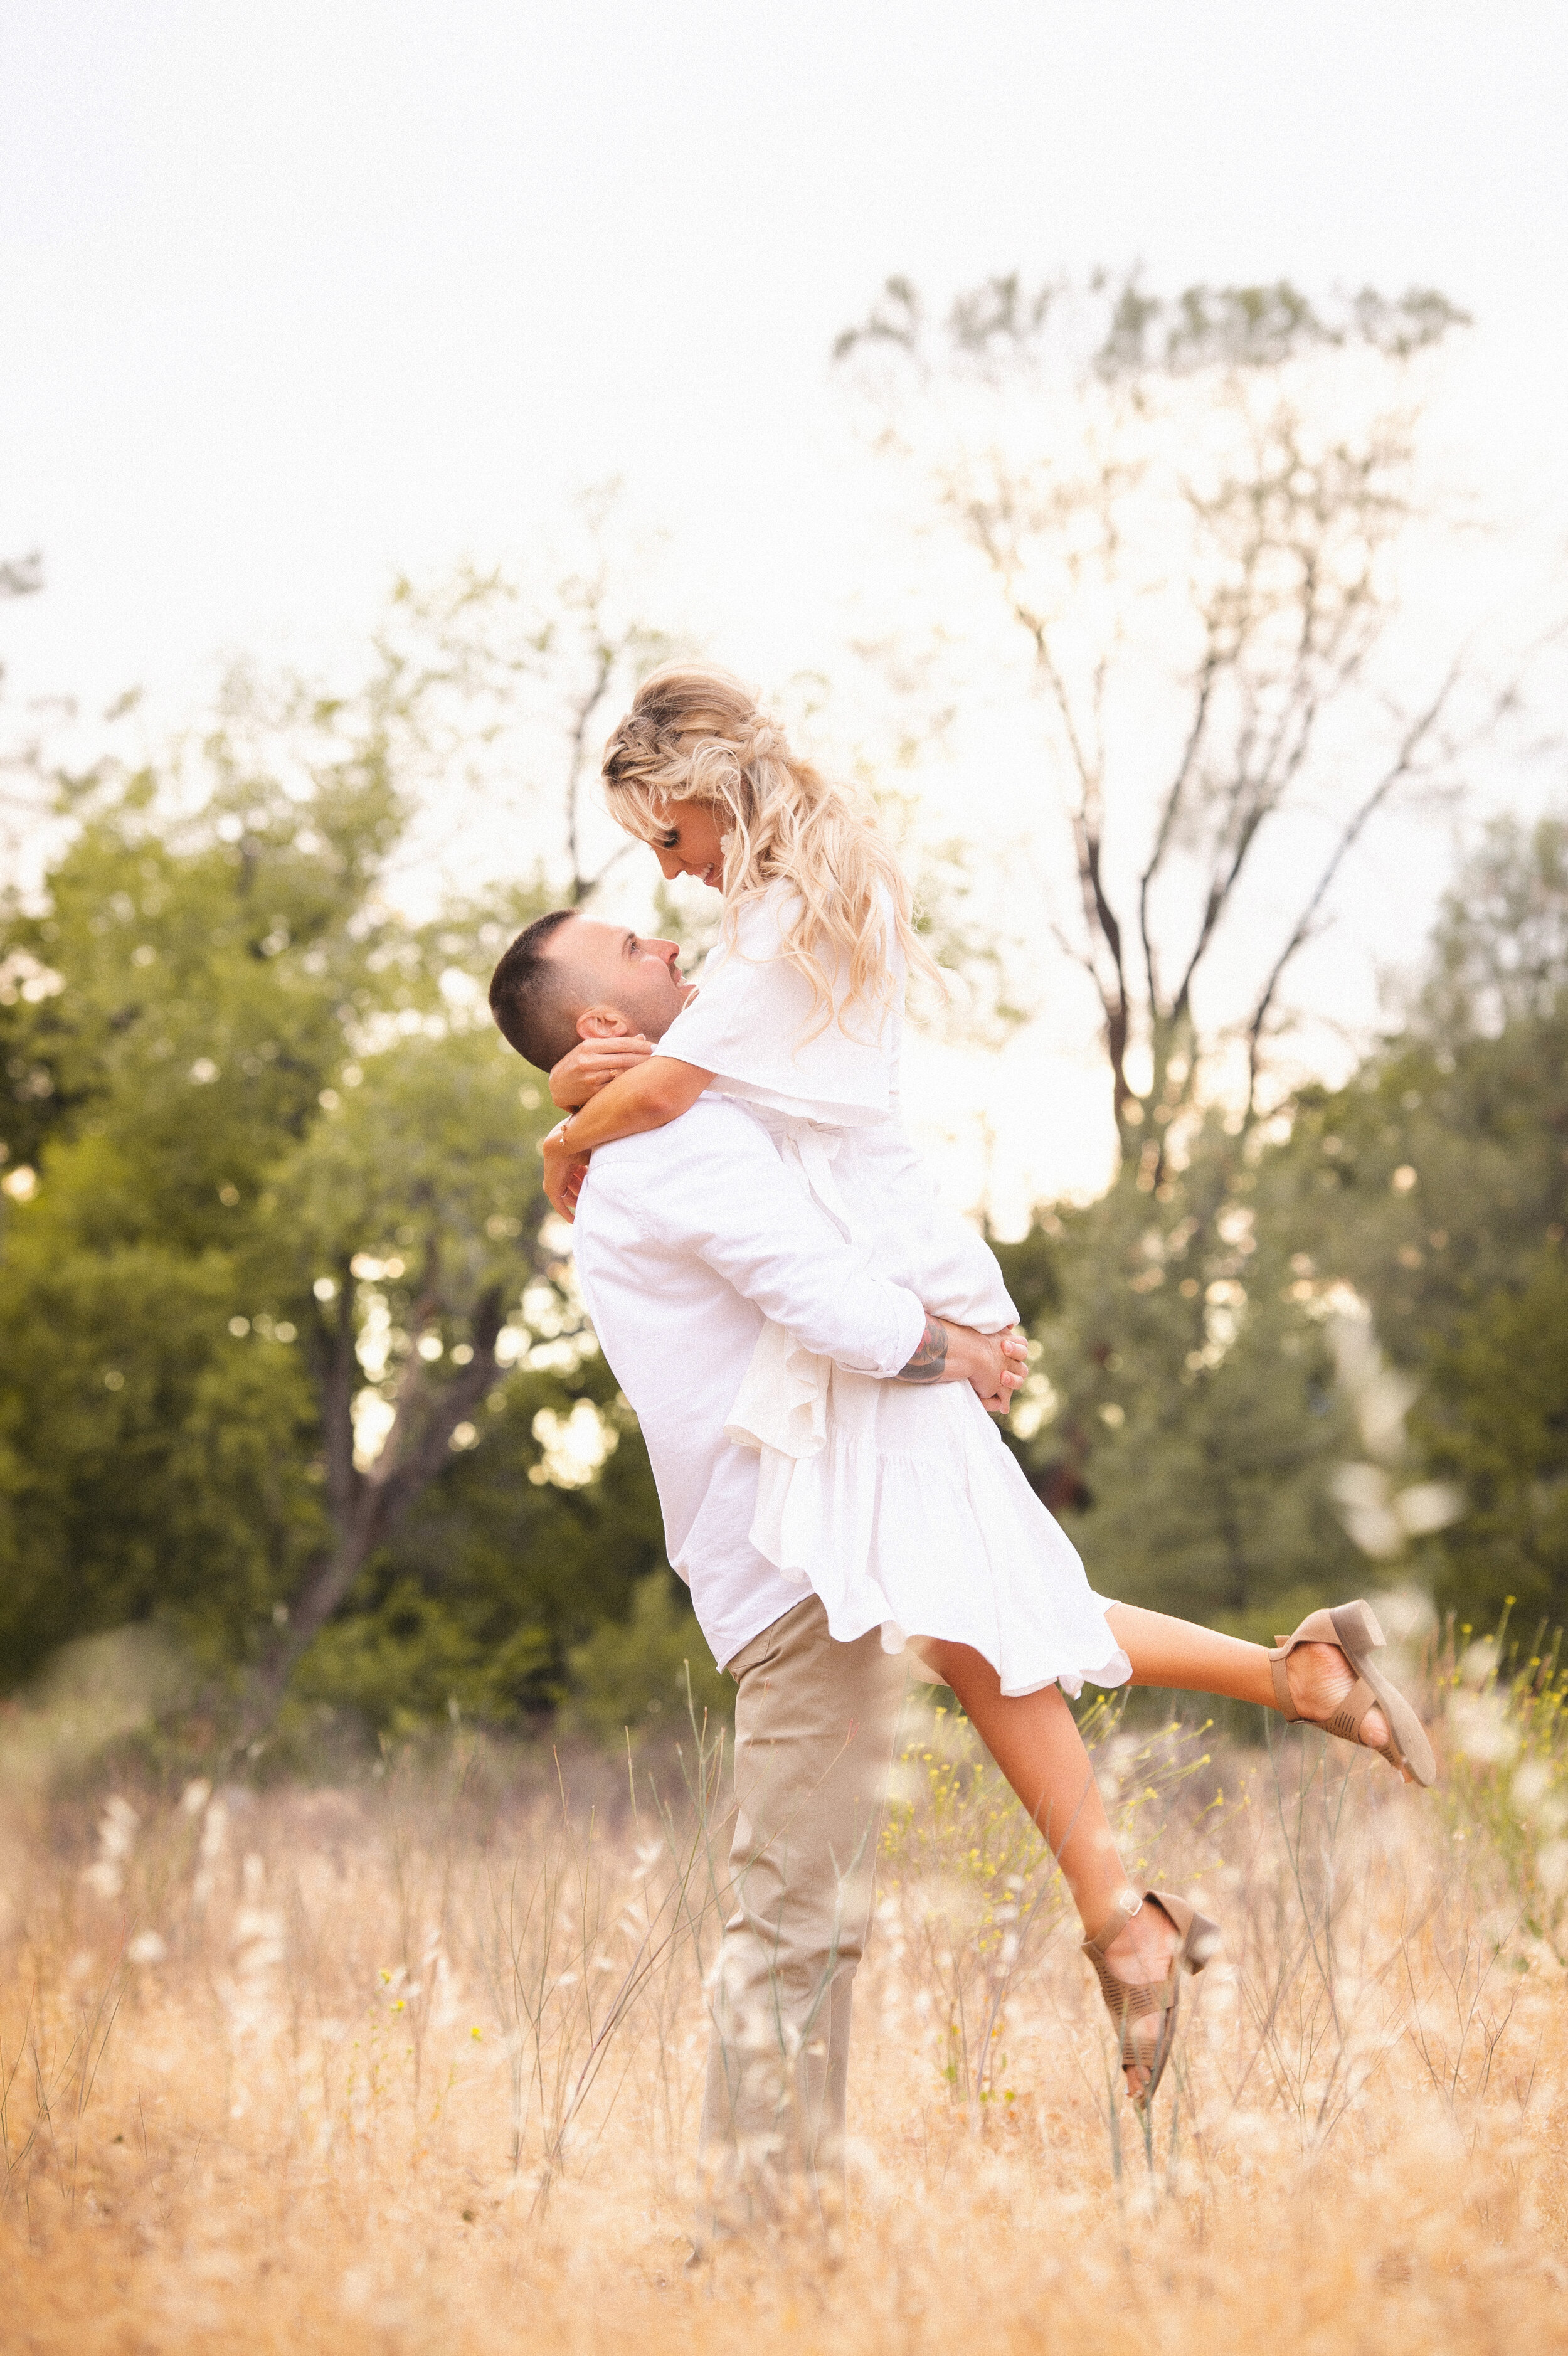 Engagement Sessions Start at $170 per hour